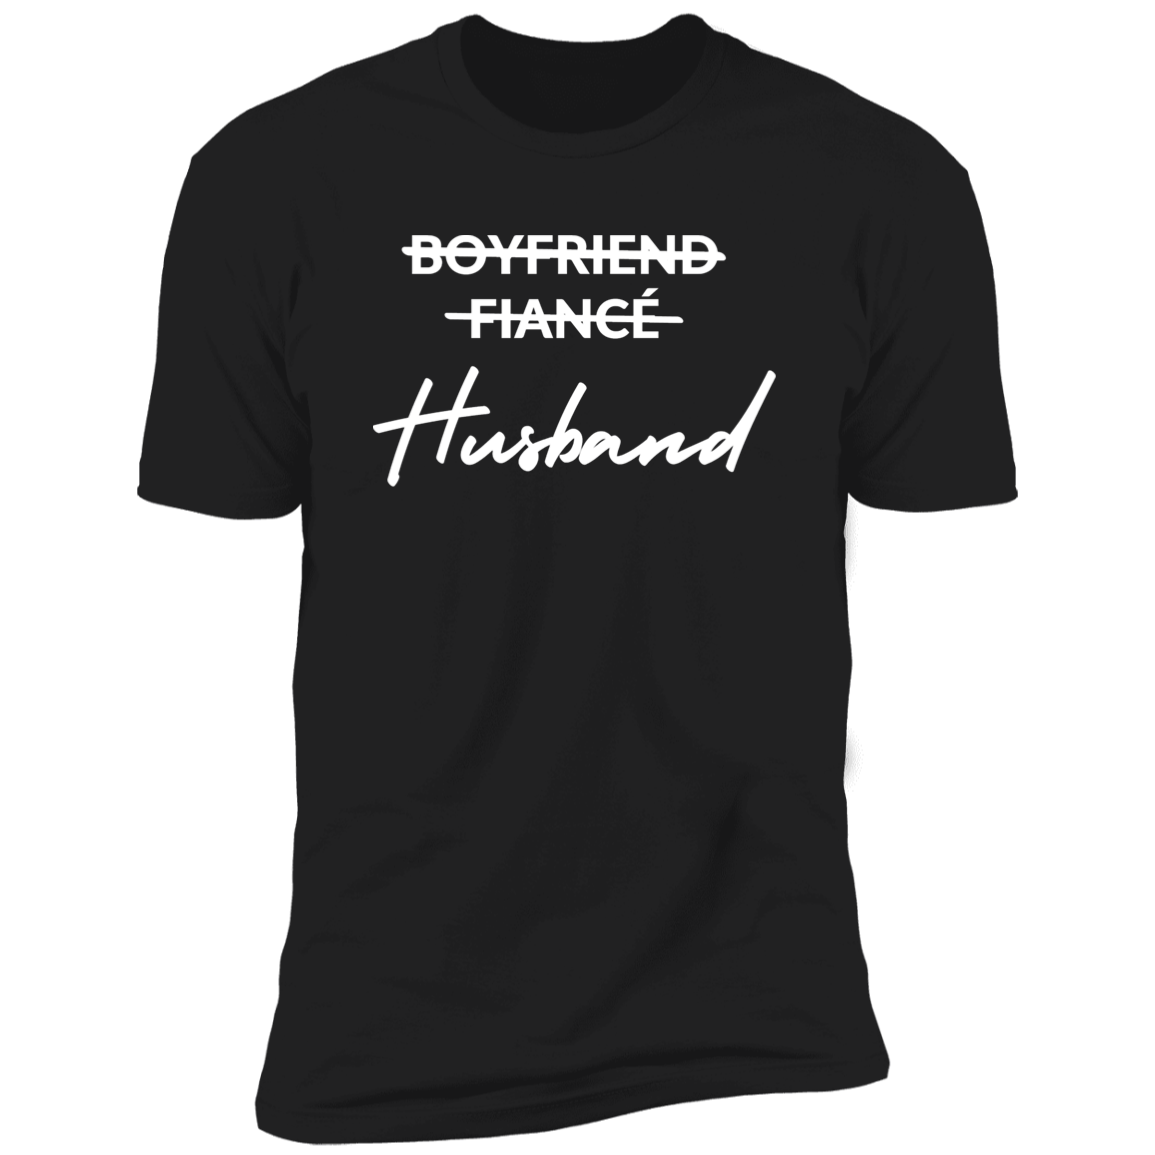 Promoted to (Wife/Husband T-Shirts)